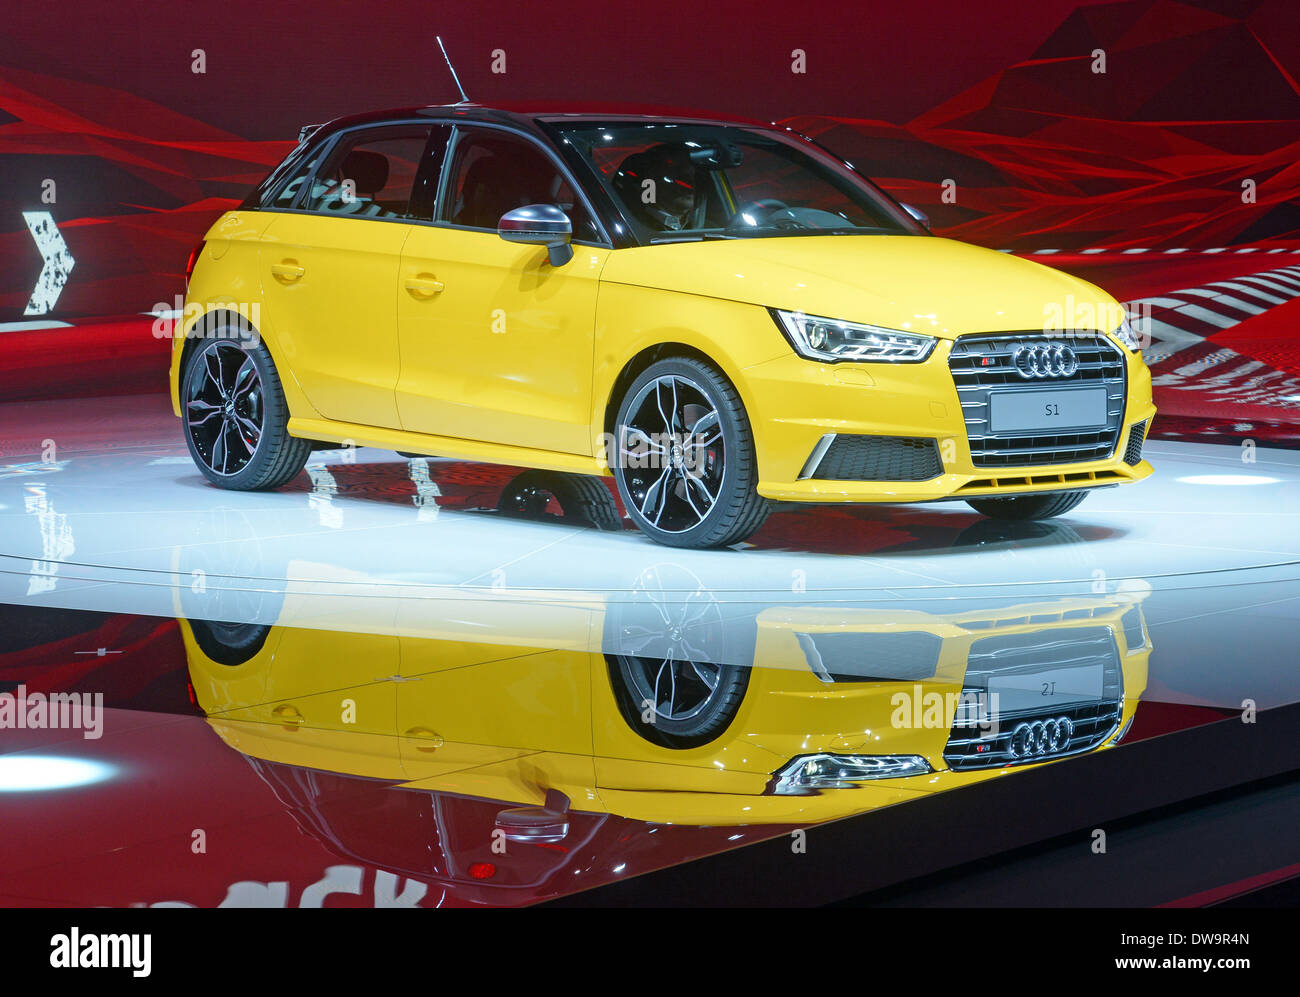 Geneva, Switzerland. 04th Mar, 2014. An Audi Audi S1 is presented at the Palexpo exhibition hall during the first press day of the Geneva Motor Show in Geneva, Switzerland, 04 March 2014. The 84th Geneva Motor Show 2014 takes place from 06 till 16 March 2014. Photo: Uli Deck/dpa/Alamy Live News Stock Photo